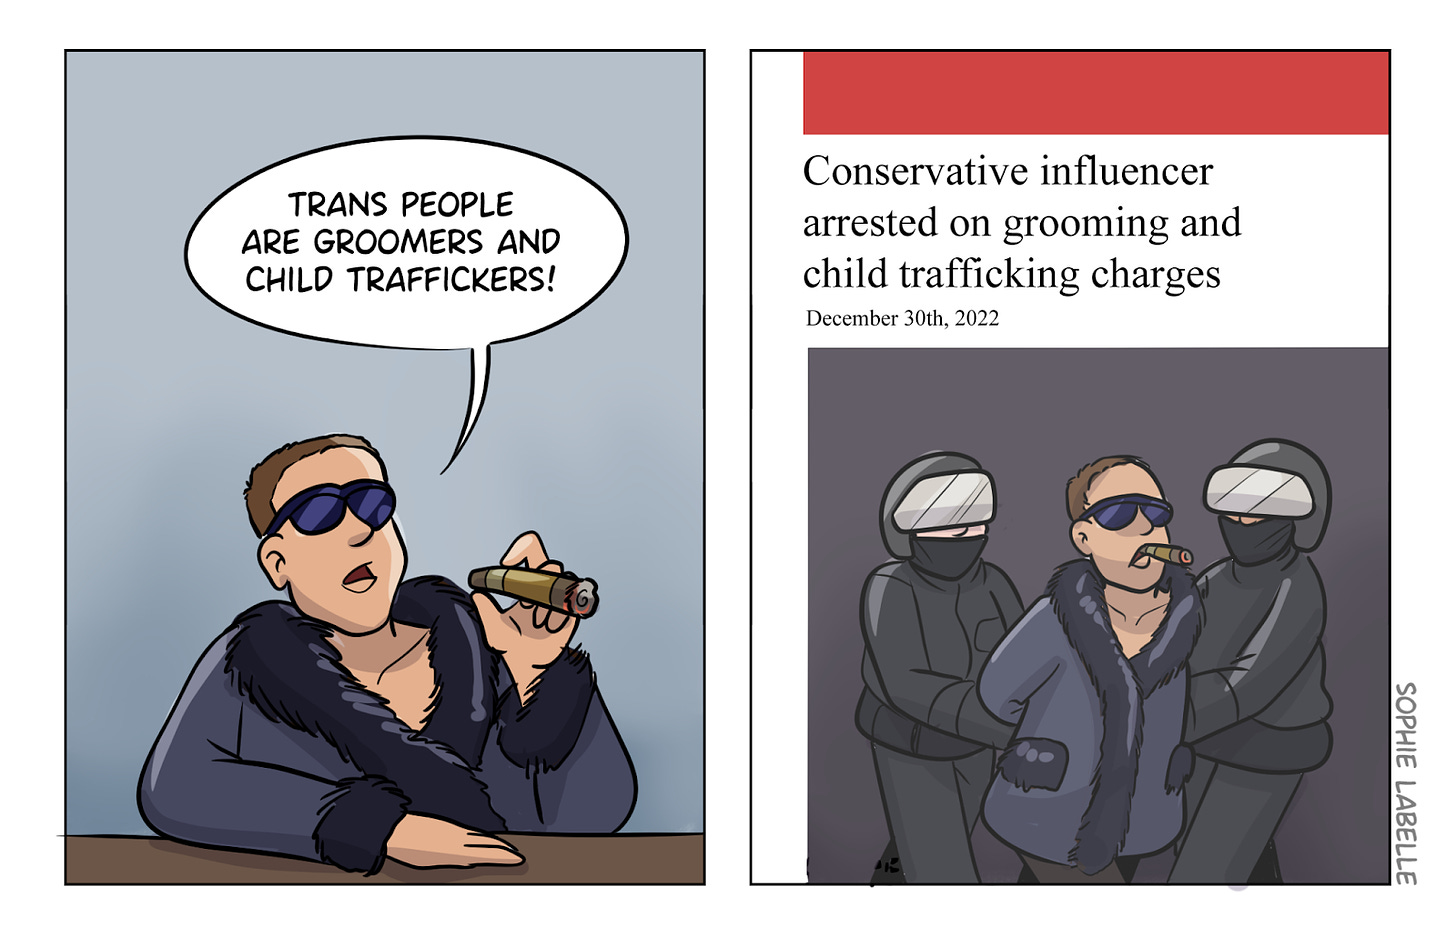 2 panel cartoon; in first panel, man smoking cigar, wearing fur robe w/ sunglasses saying "trans people are groomers and child traffickers!" in second panel, cops leading him away in handcuffs with caption "conservative influencer arrested on grooming and child trafficking charges"